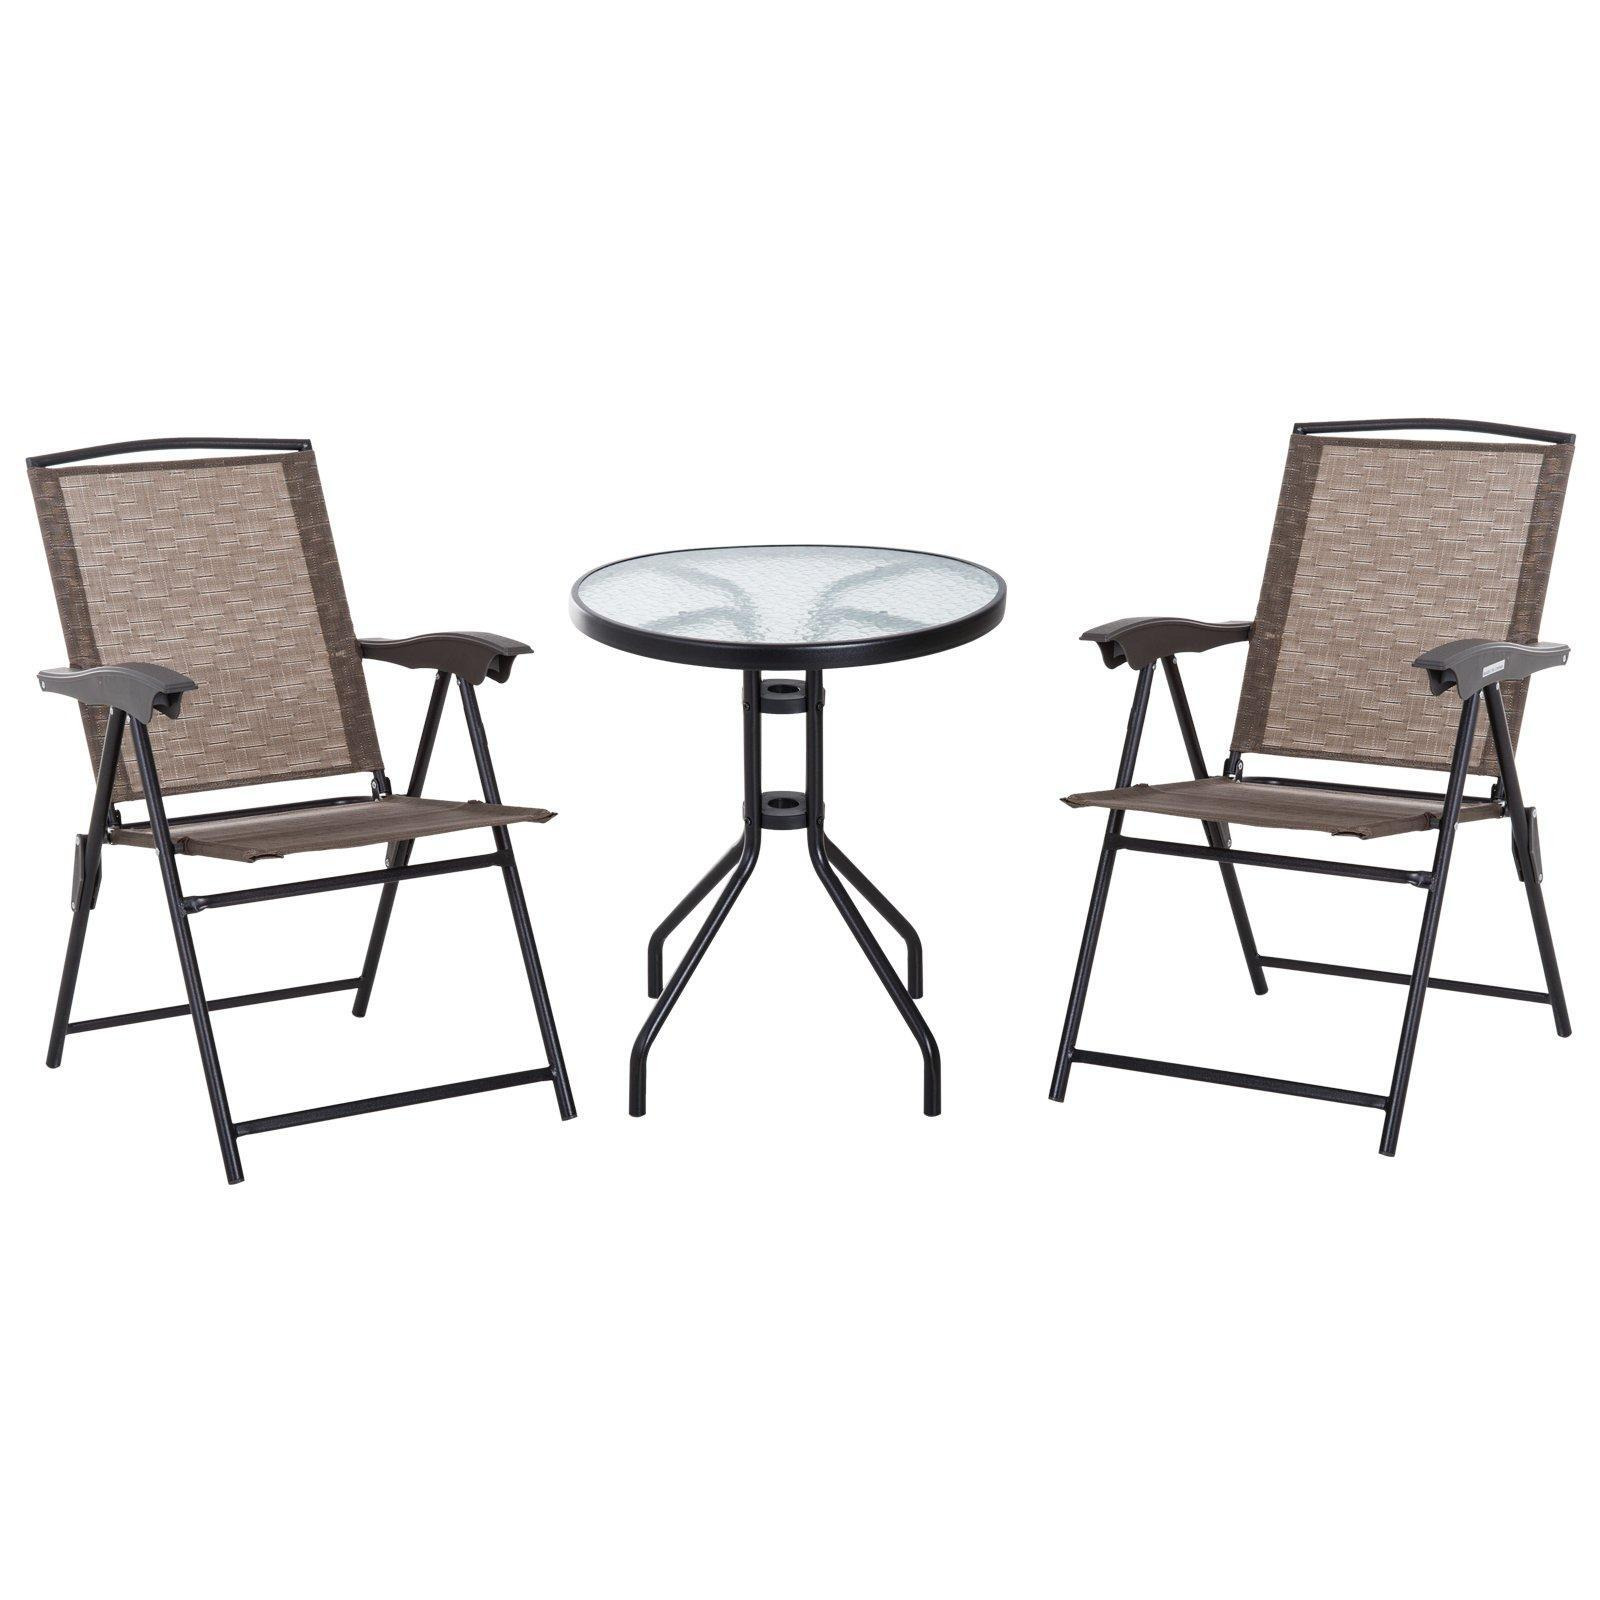 Patio Bistro Set Folding Chairs Garden Coffee Table for Balcony - image 1